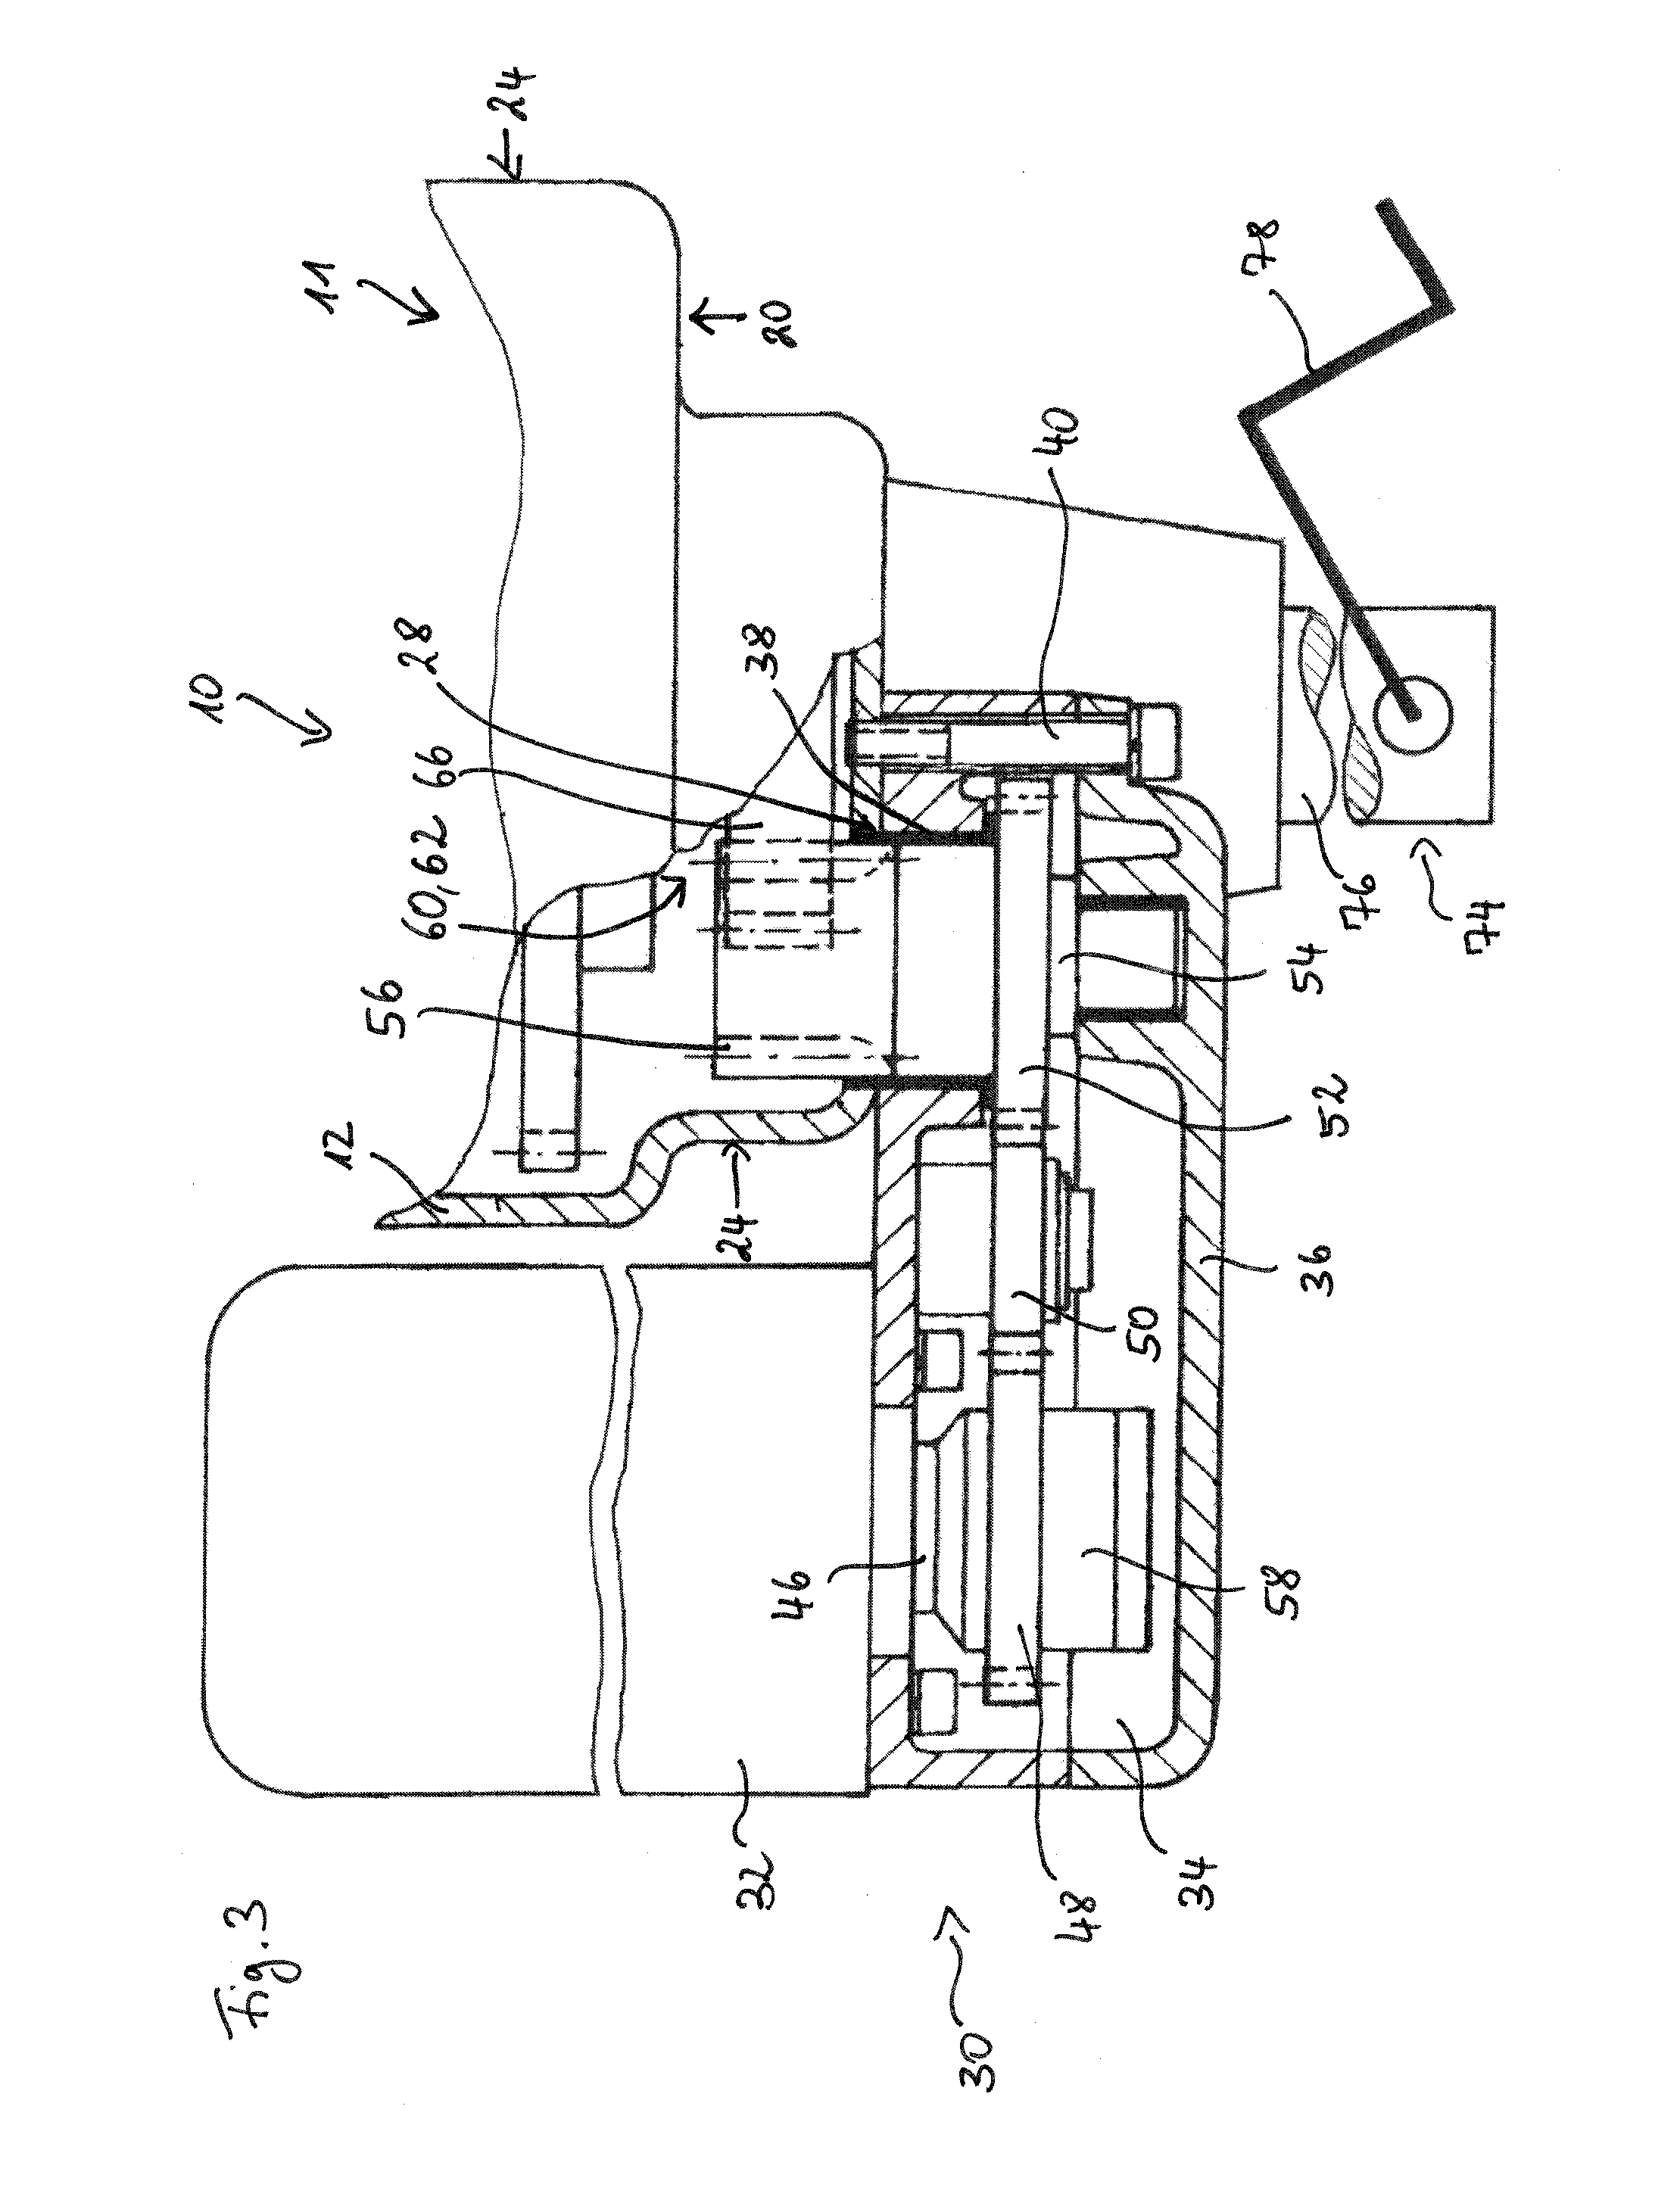 Height-Adjustable Support For a Vehicle